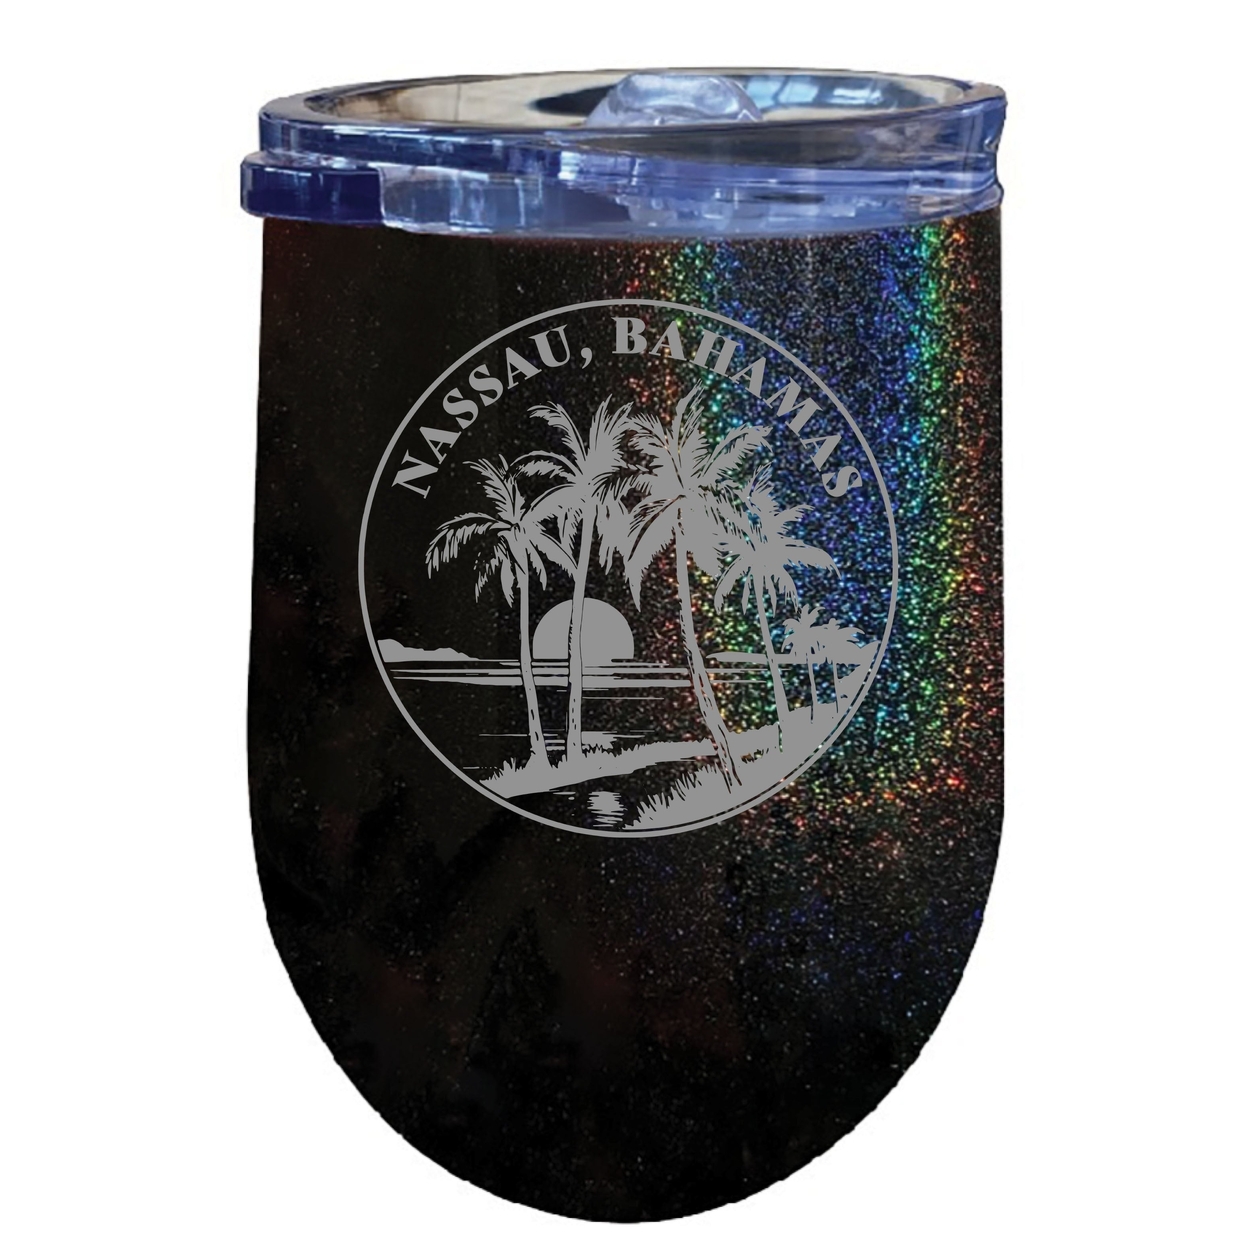 Nassau The Bahamas Souvenir 12 Oz Engraved Insulated Wine Stainless Steel Tumbler - White,,4-Pack